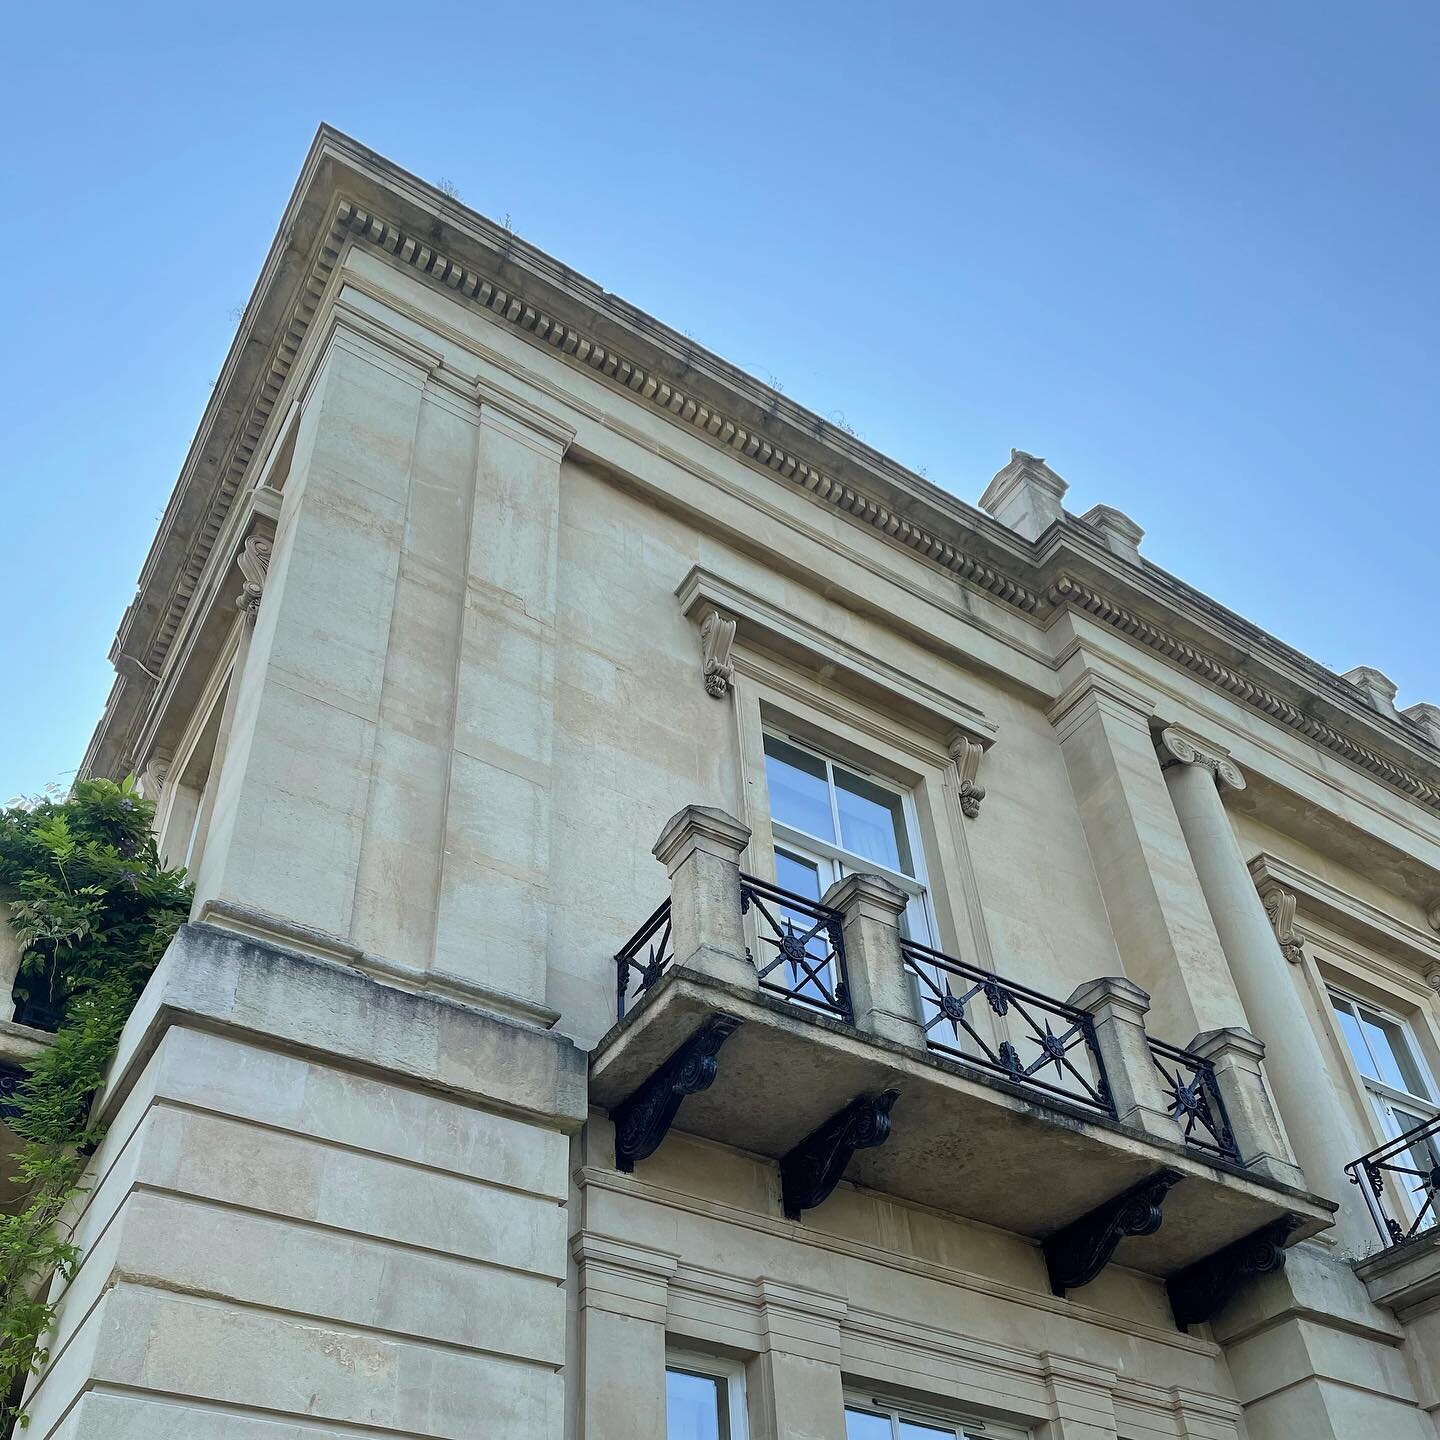 Looking at a lovely property in Bath this morning. A brief survey followed by crunching some numbers and undertaking a load assessment to provide safe working loads to a production company who will be filming here. #structuralengineering #staticdynam